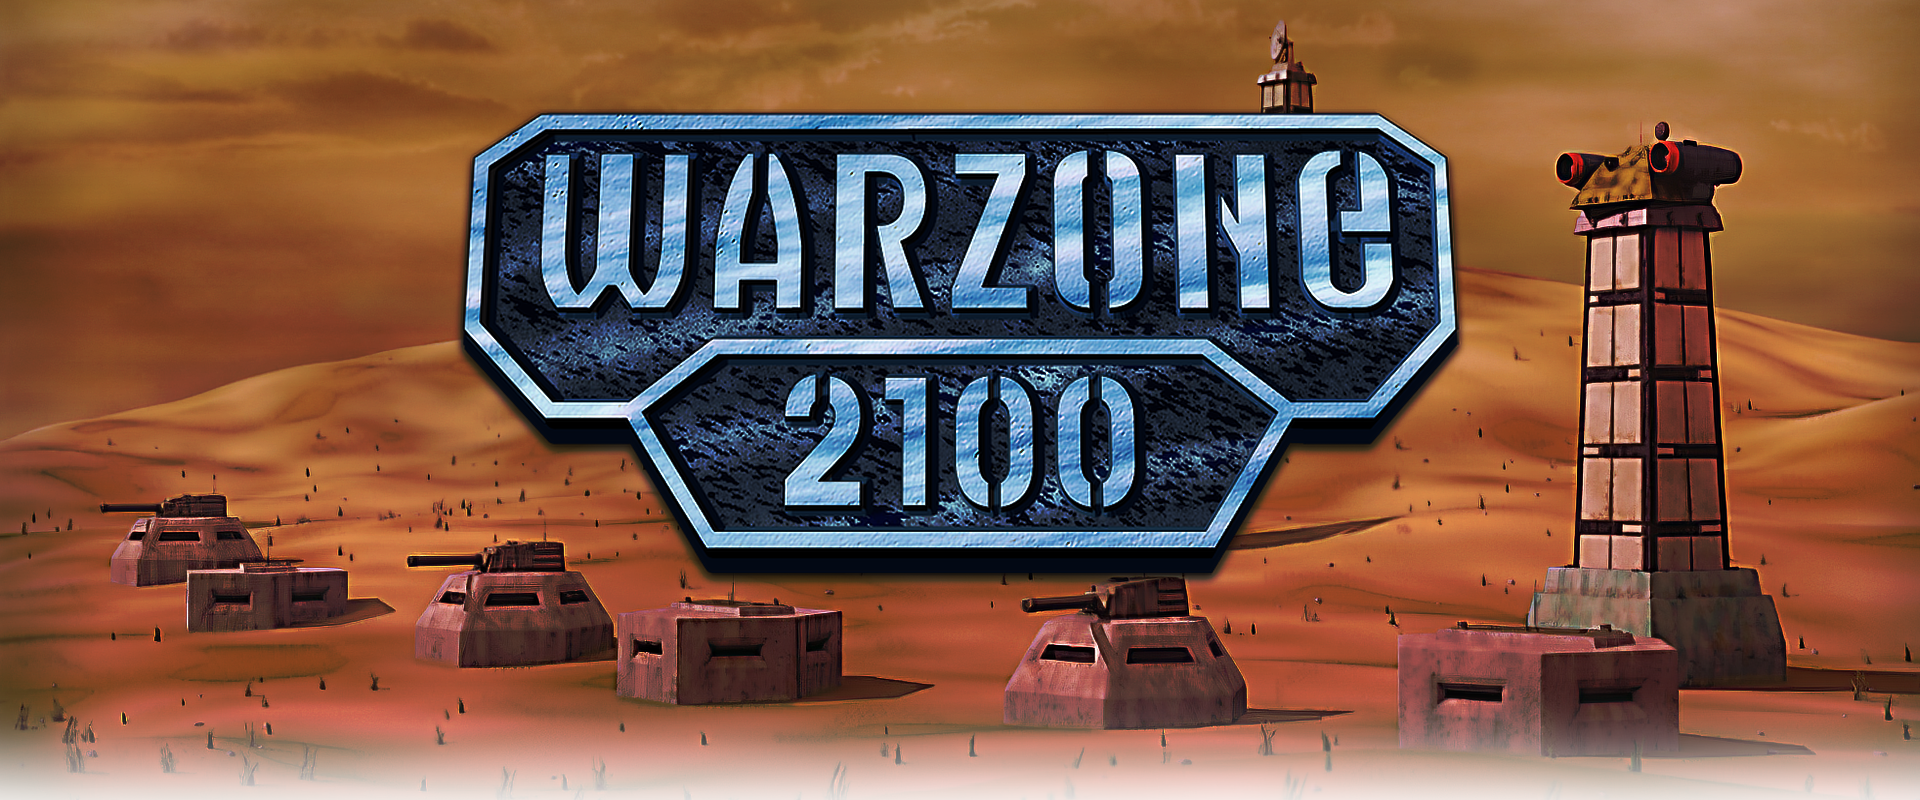 warzone 2100 guide